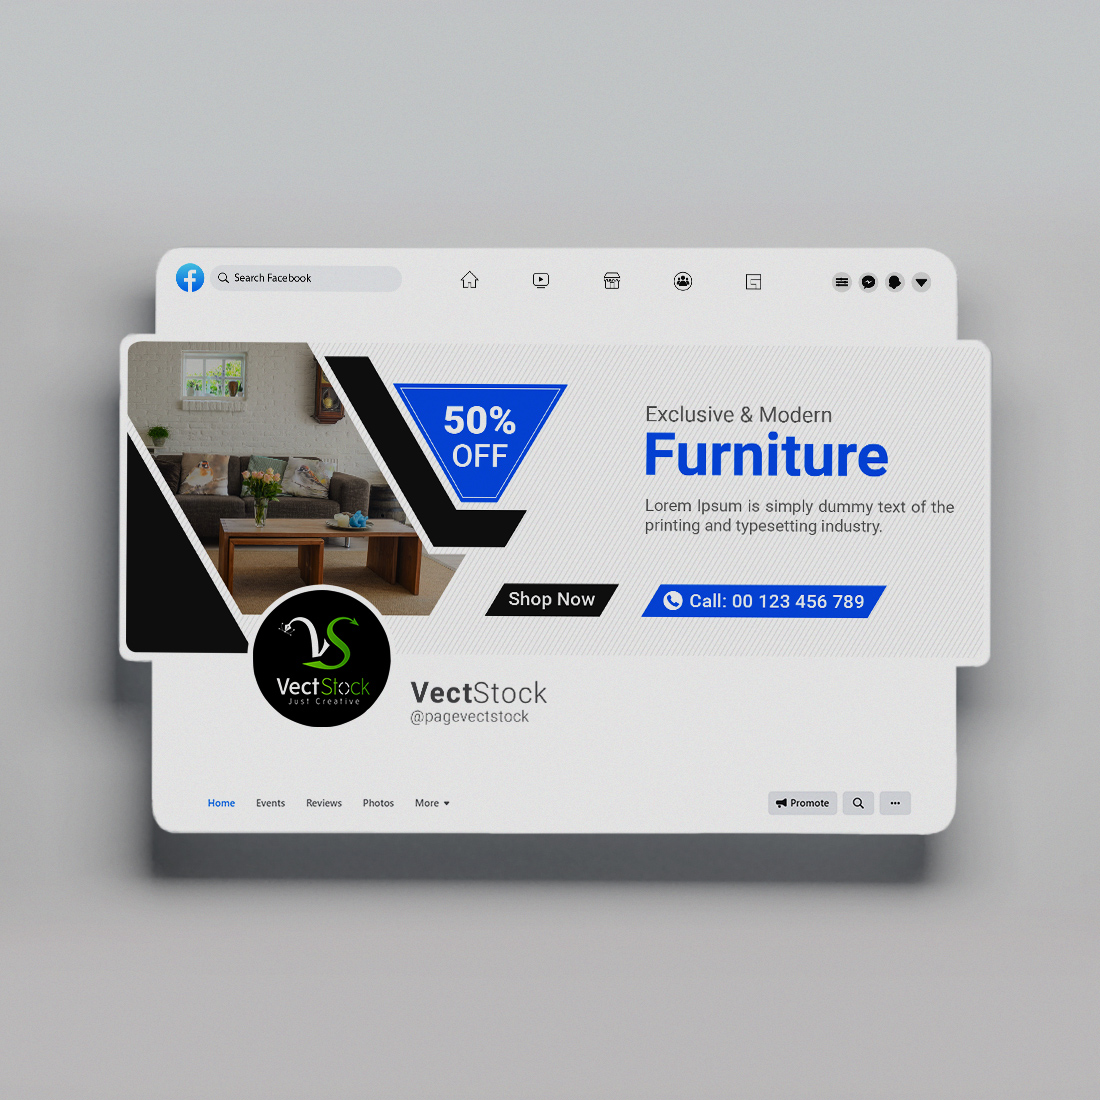 Furniture sale facebook cover template and social media banner cover image.